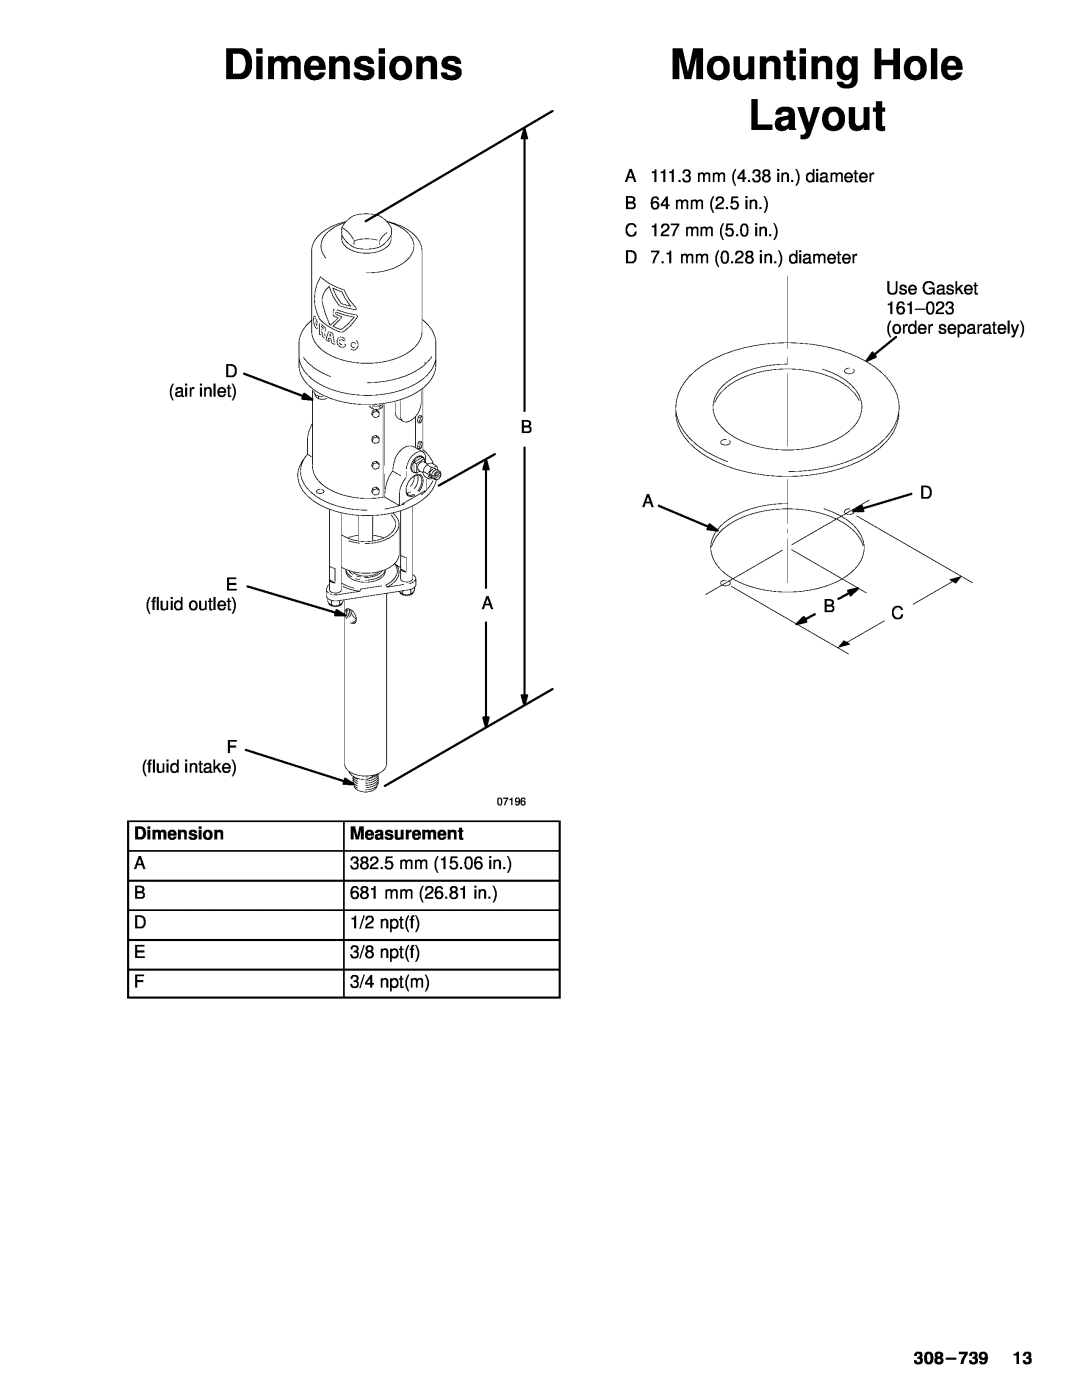 Graco 239-327, Series A manual Dimensions, Mounting Hole, Layout, Measurement 